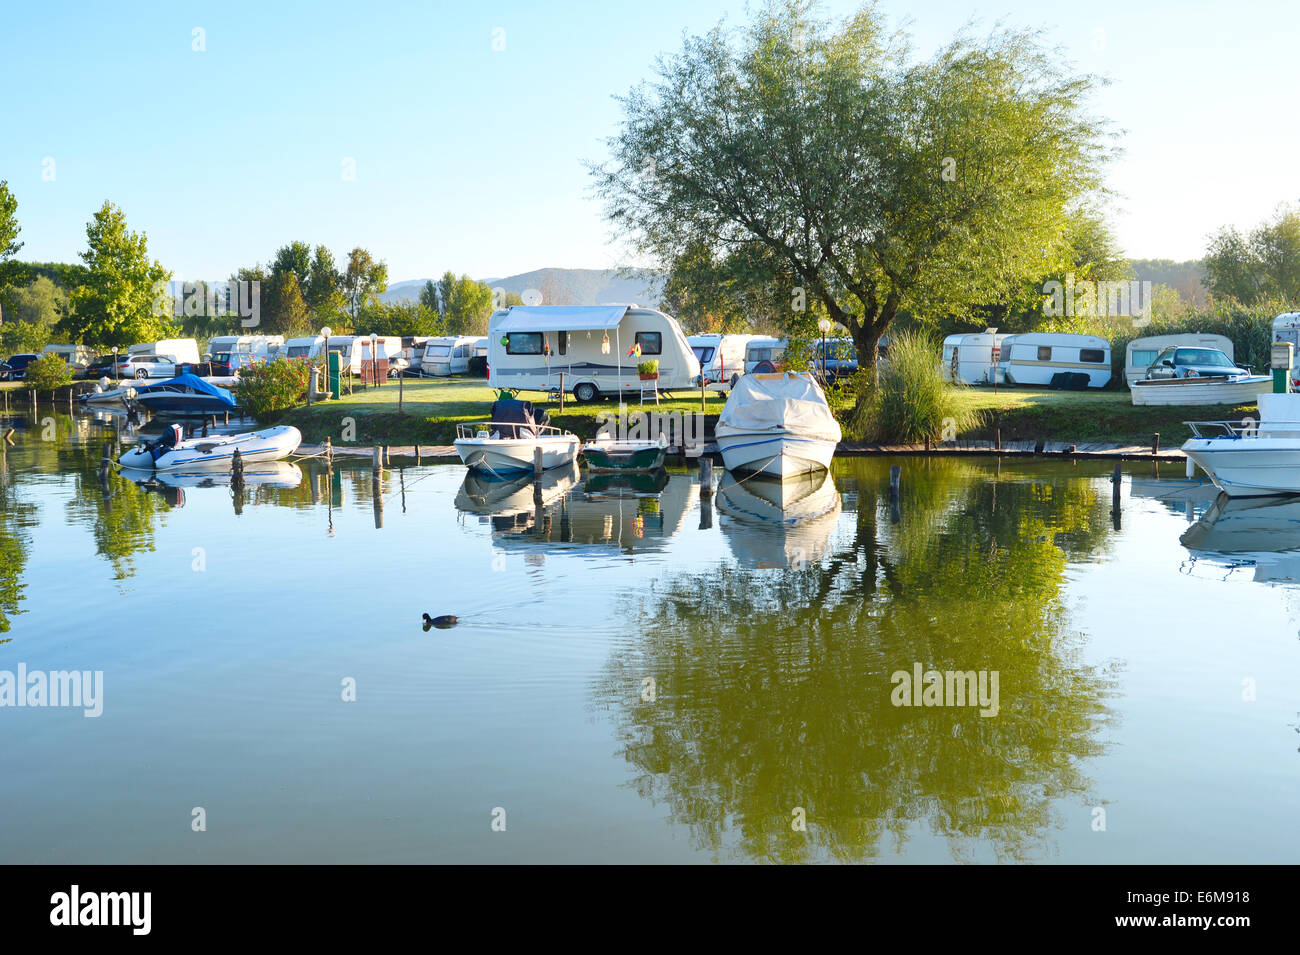 Camping site on a lake with caravans and boats Stock Photo